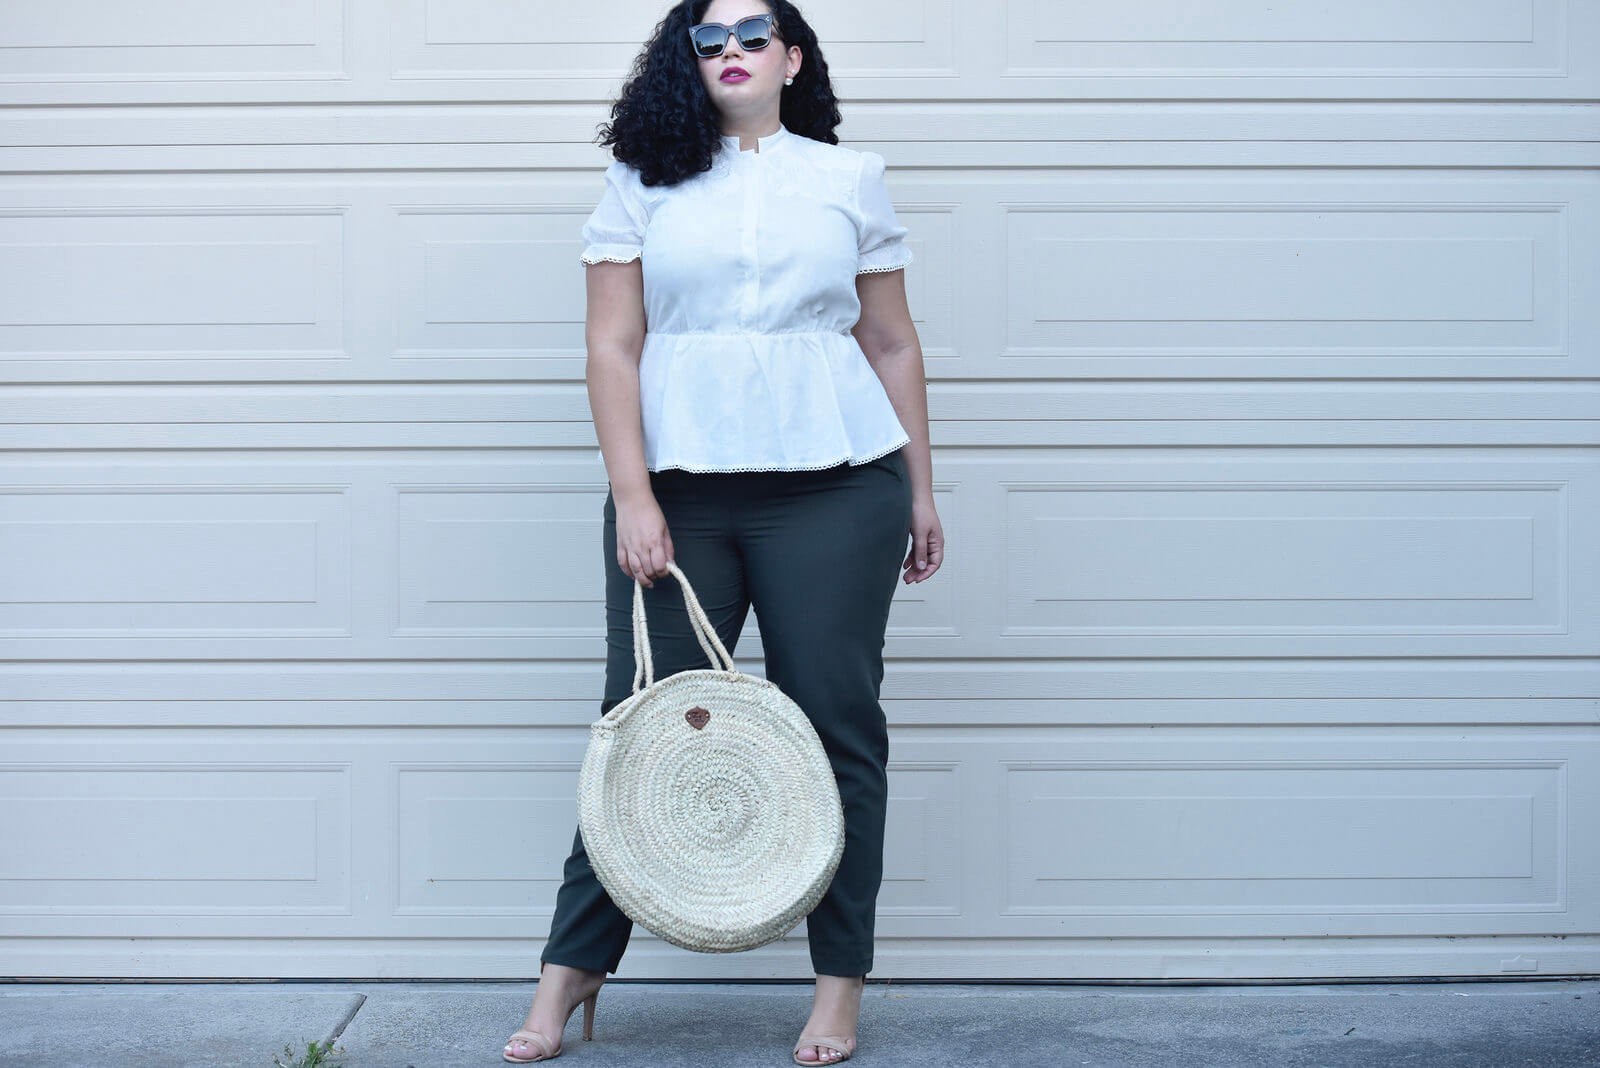 Updated classics for the office via @GirlWithCurves